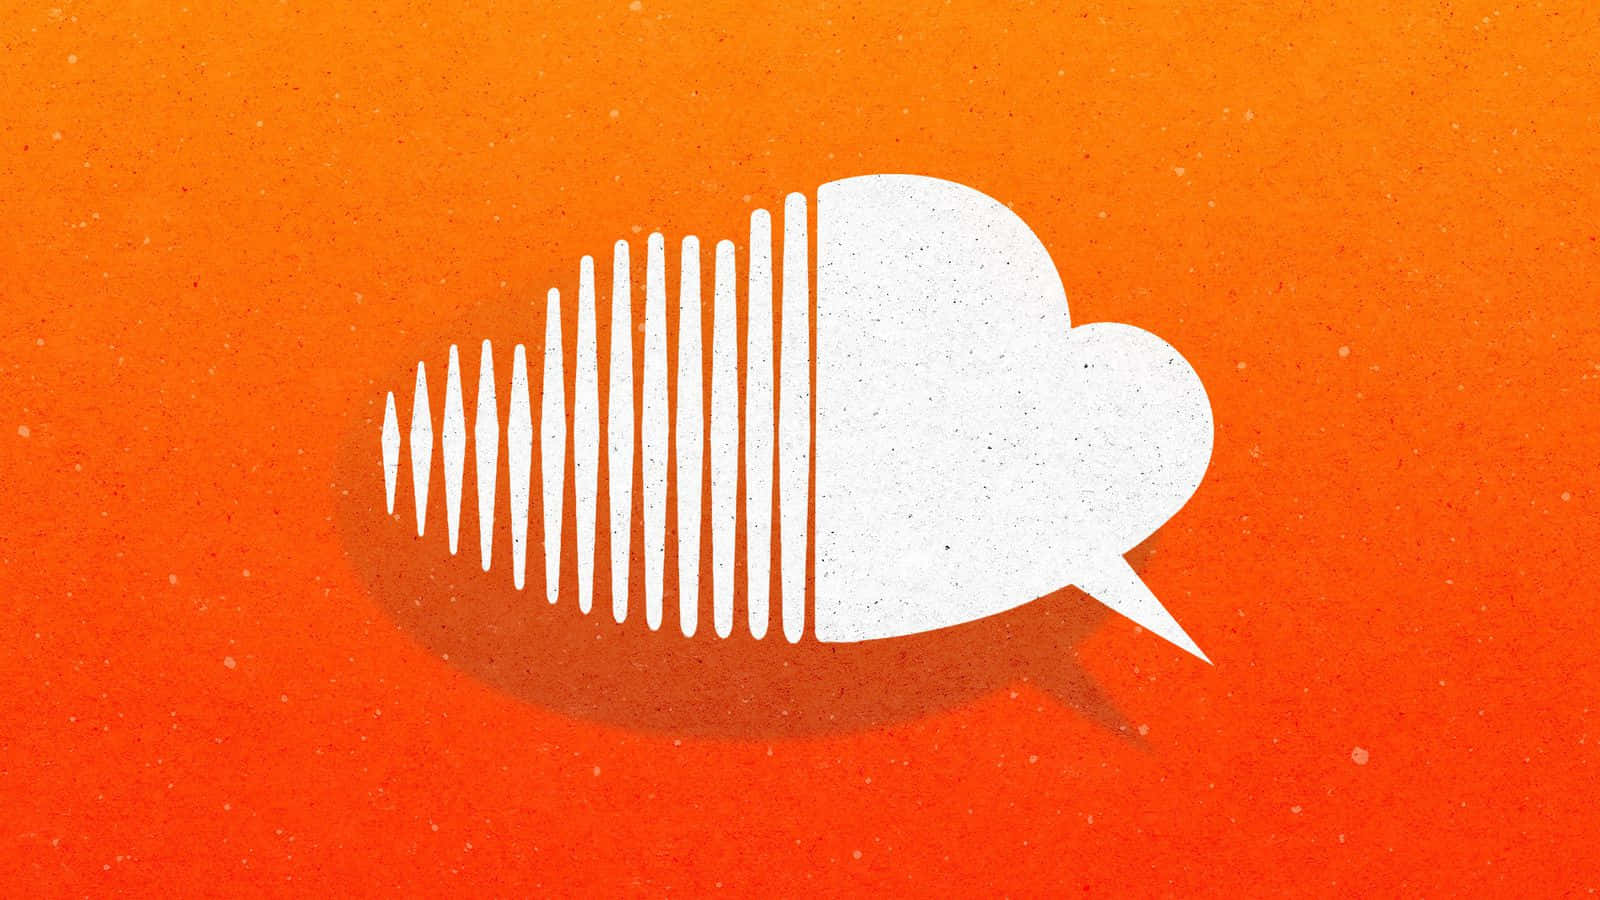 Listen to music online with ease using Soundcloud